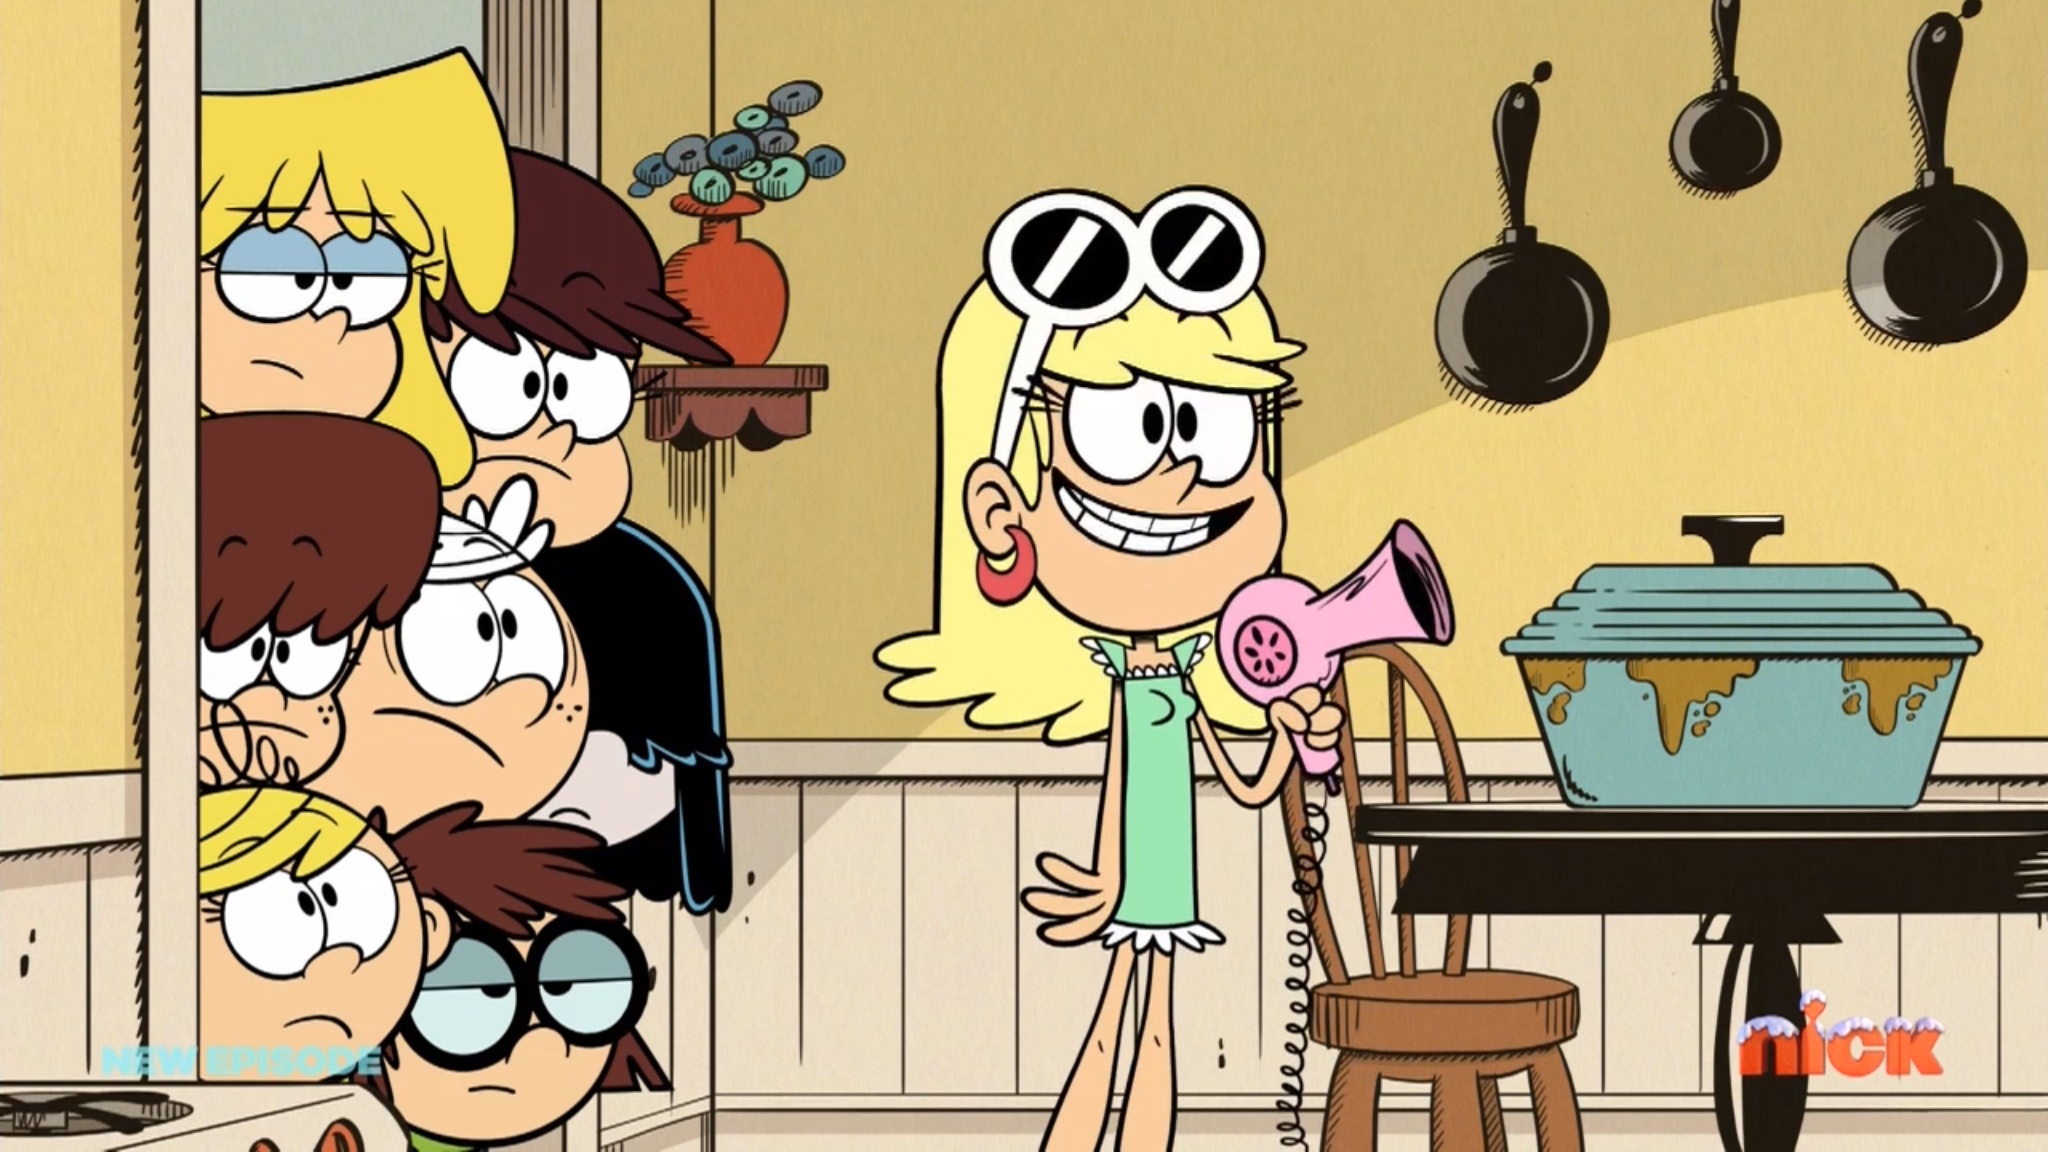 The Loud House Images on Fanpop.